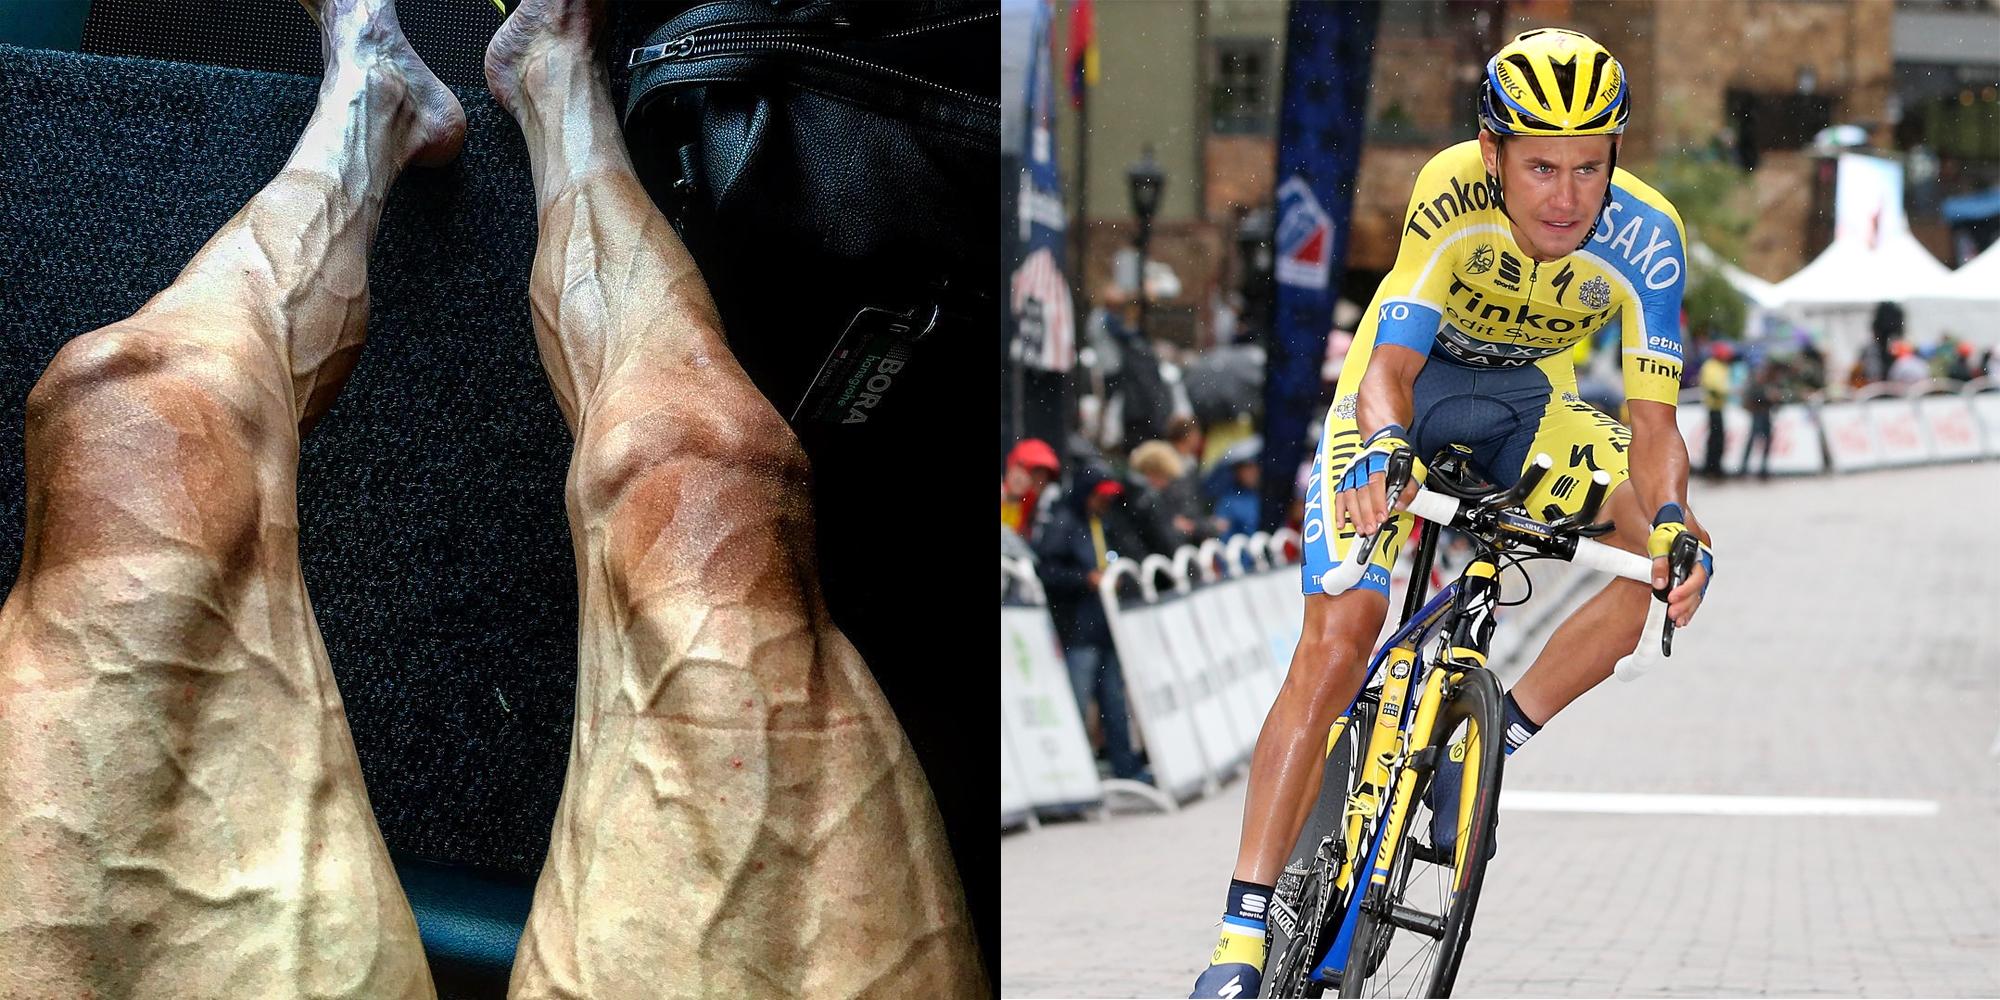 Cyclist shares what his legs look like after biking 1,758 miles in 17 days | indy100